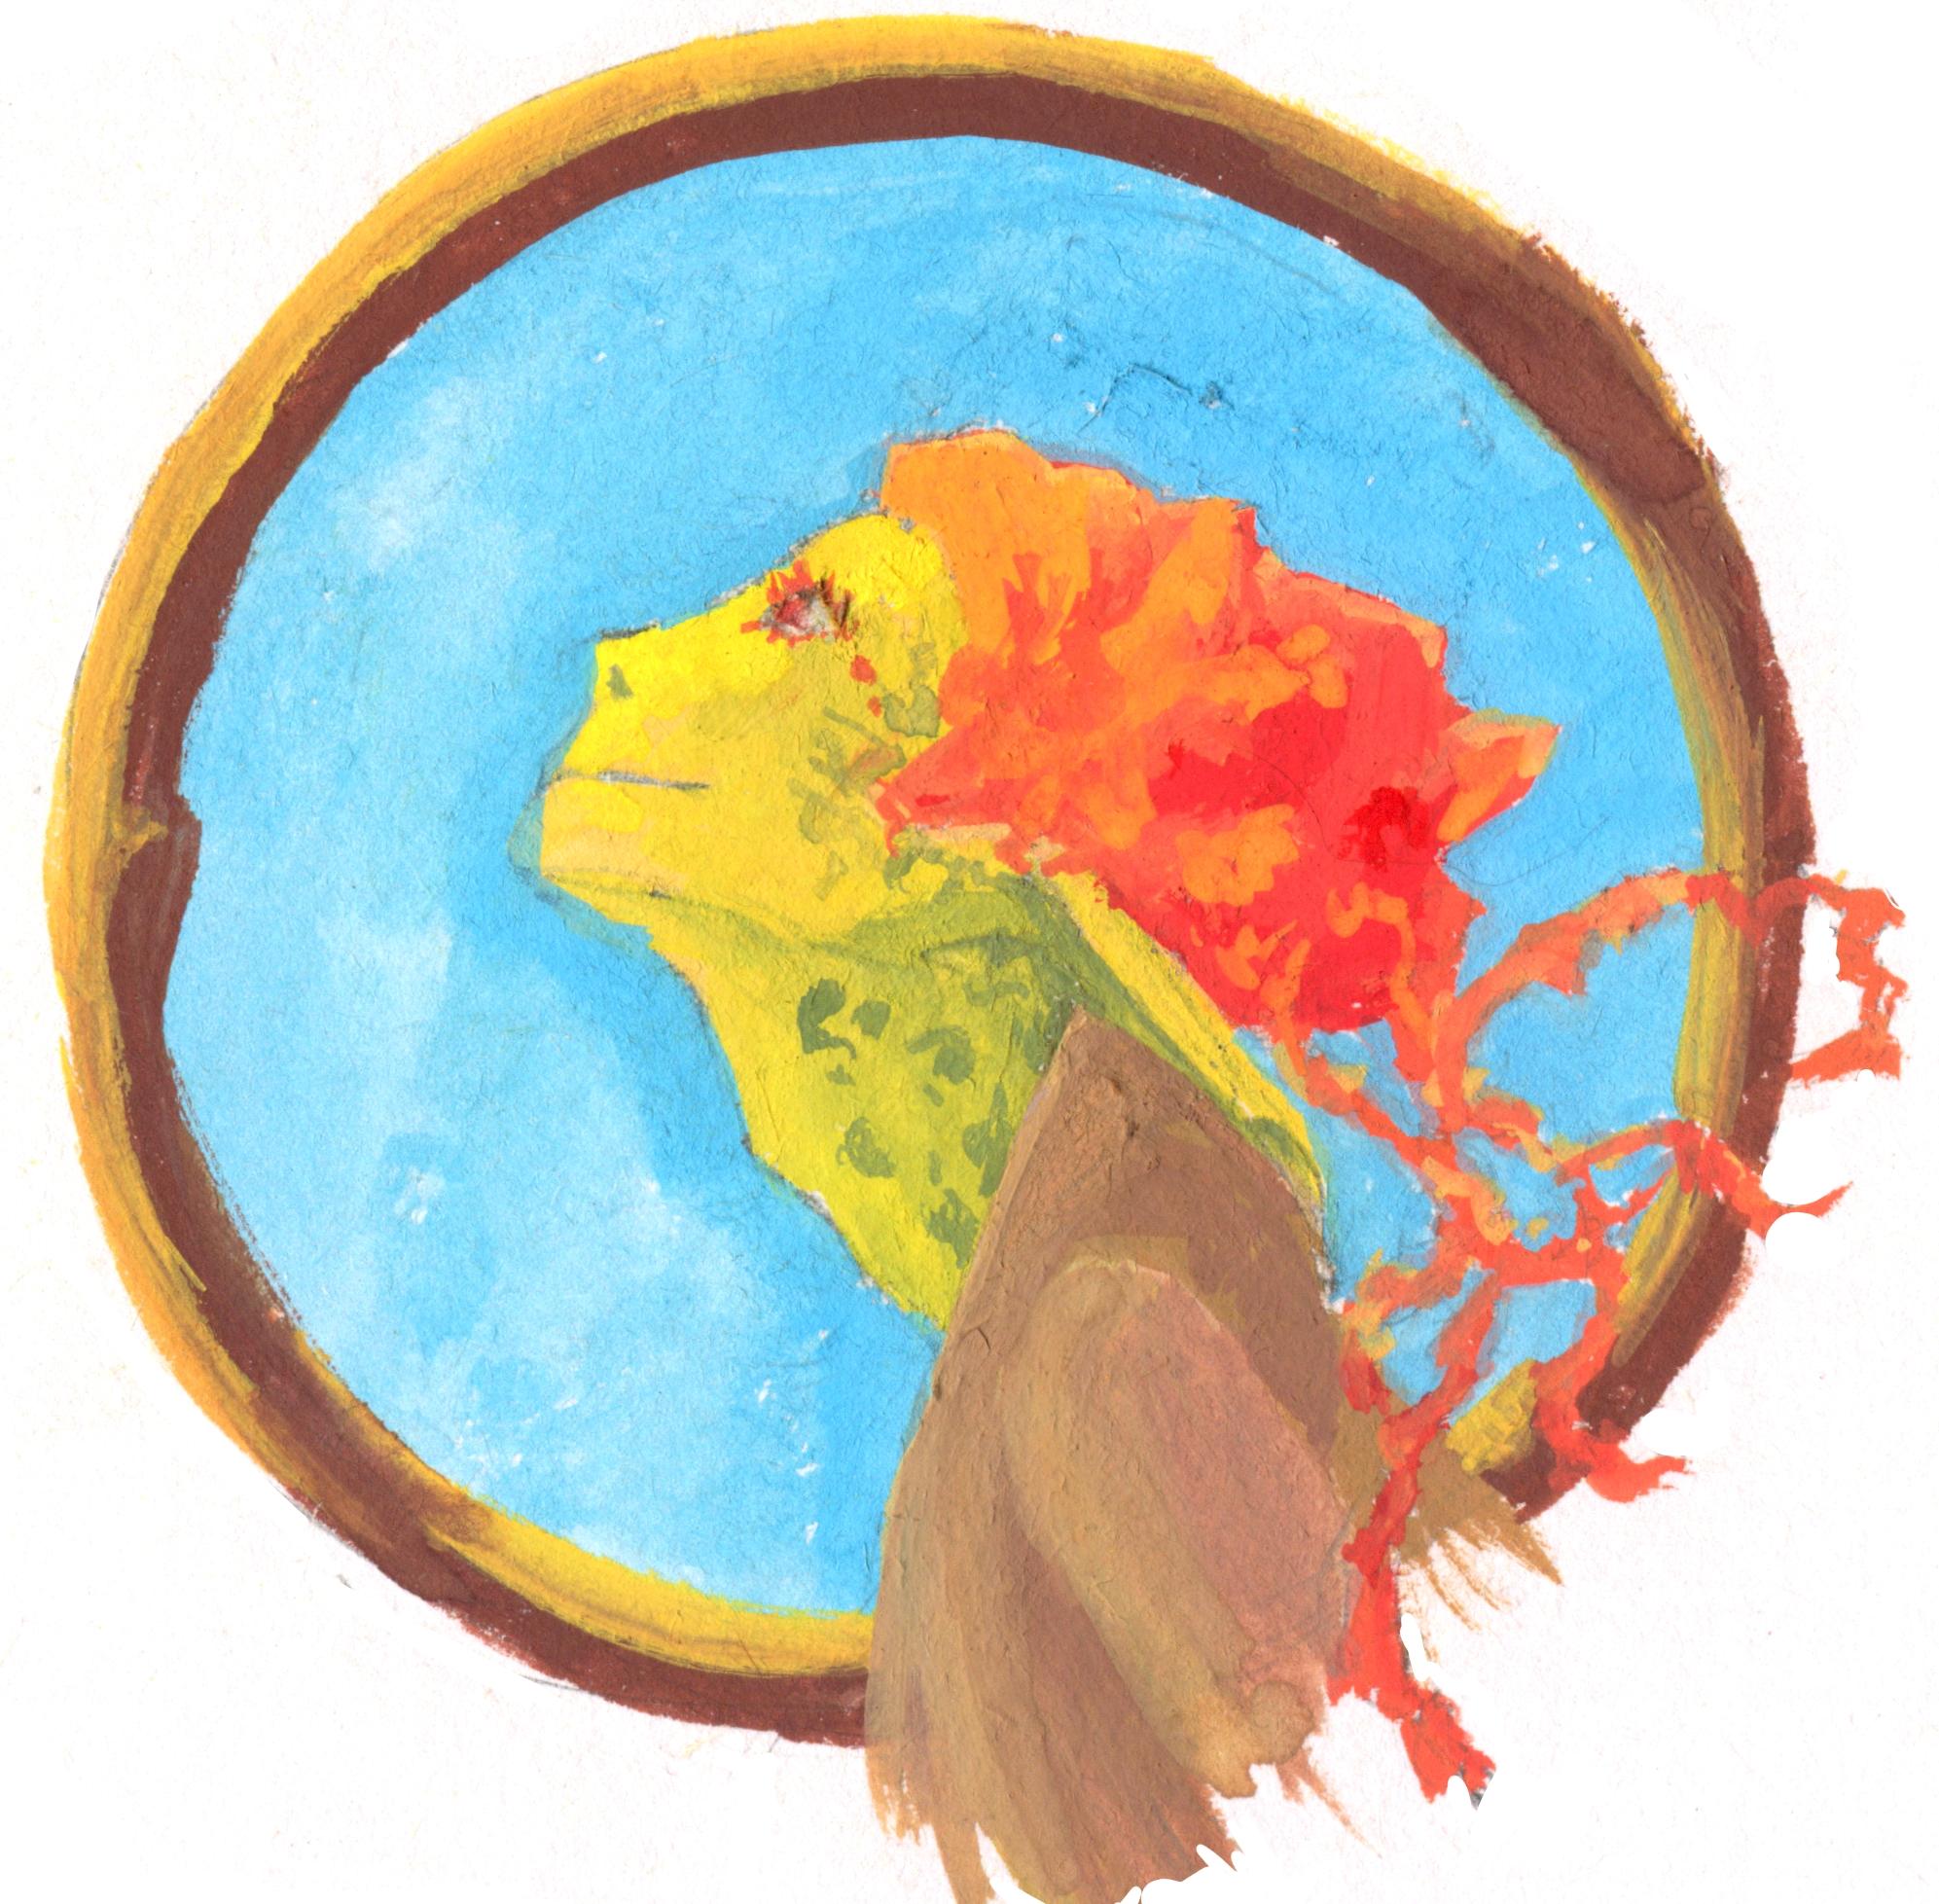 Painting of a yellow green-skinned person with bright red hair. It's
styled like a jellyfish, a big mass with tendrils coming below. He's looking up
and to the left, smiling into an unseen lightsource. The background is a
porthole into a bright blue sky.